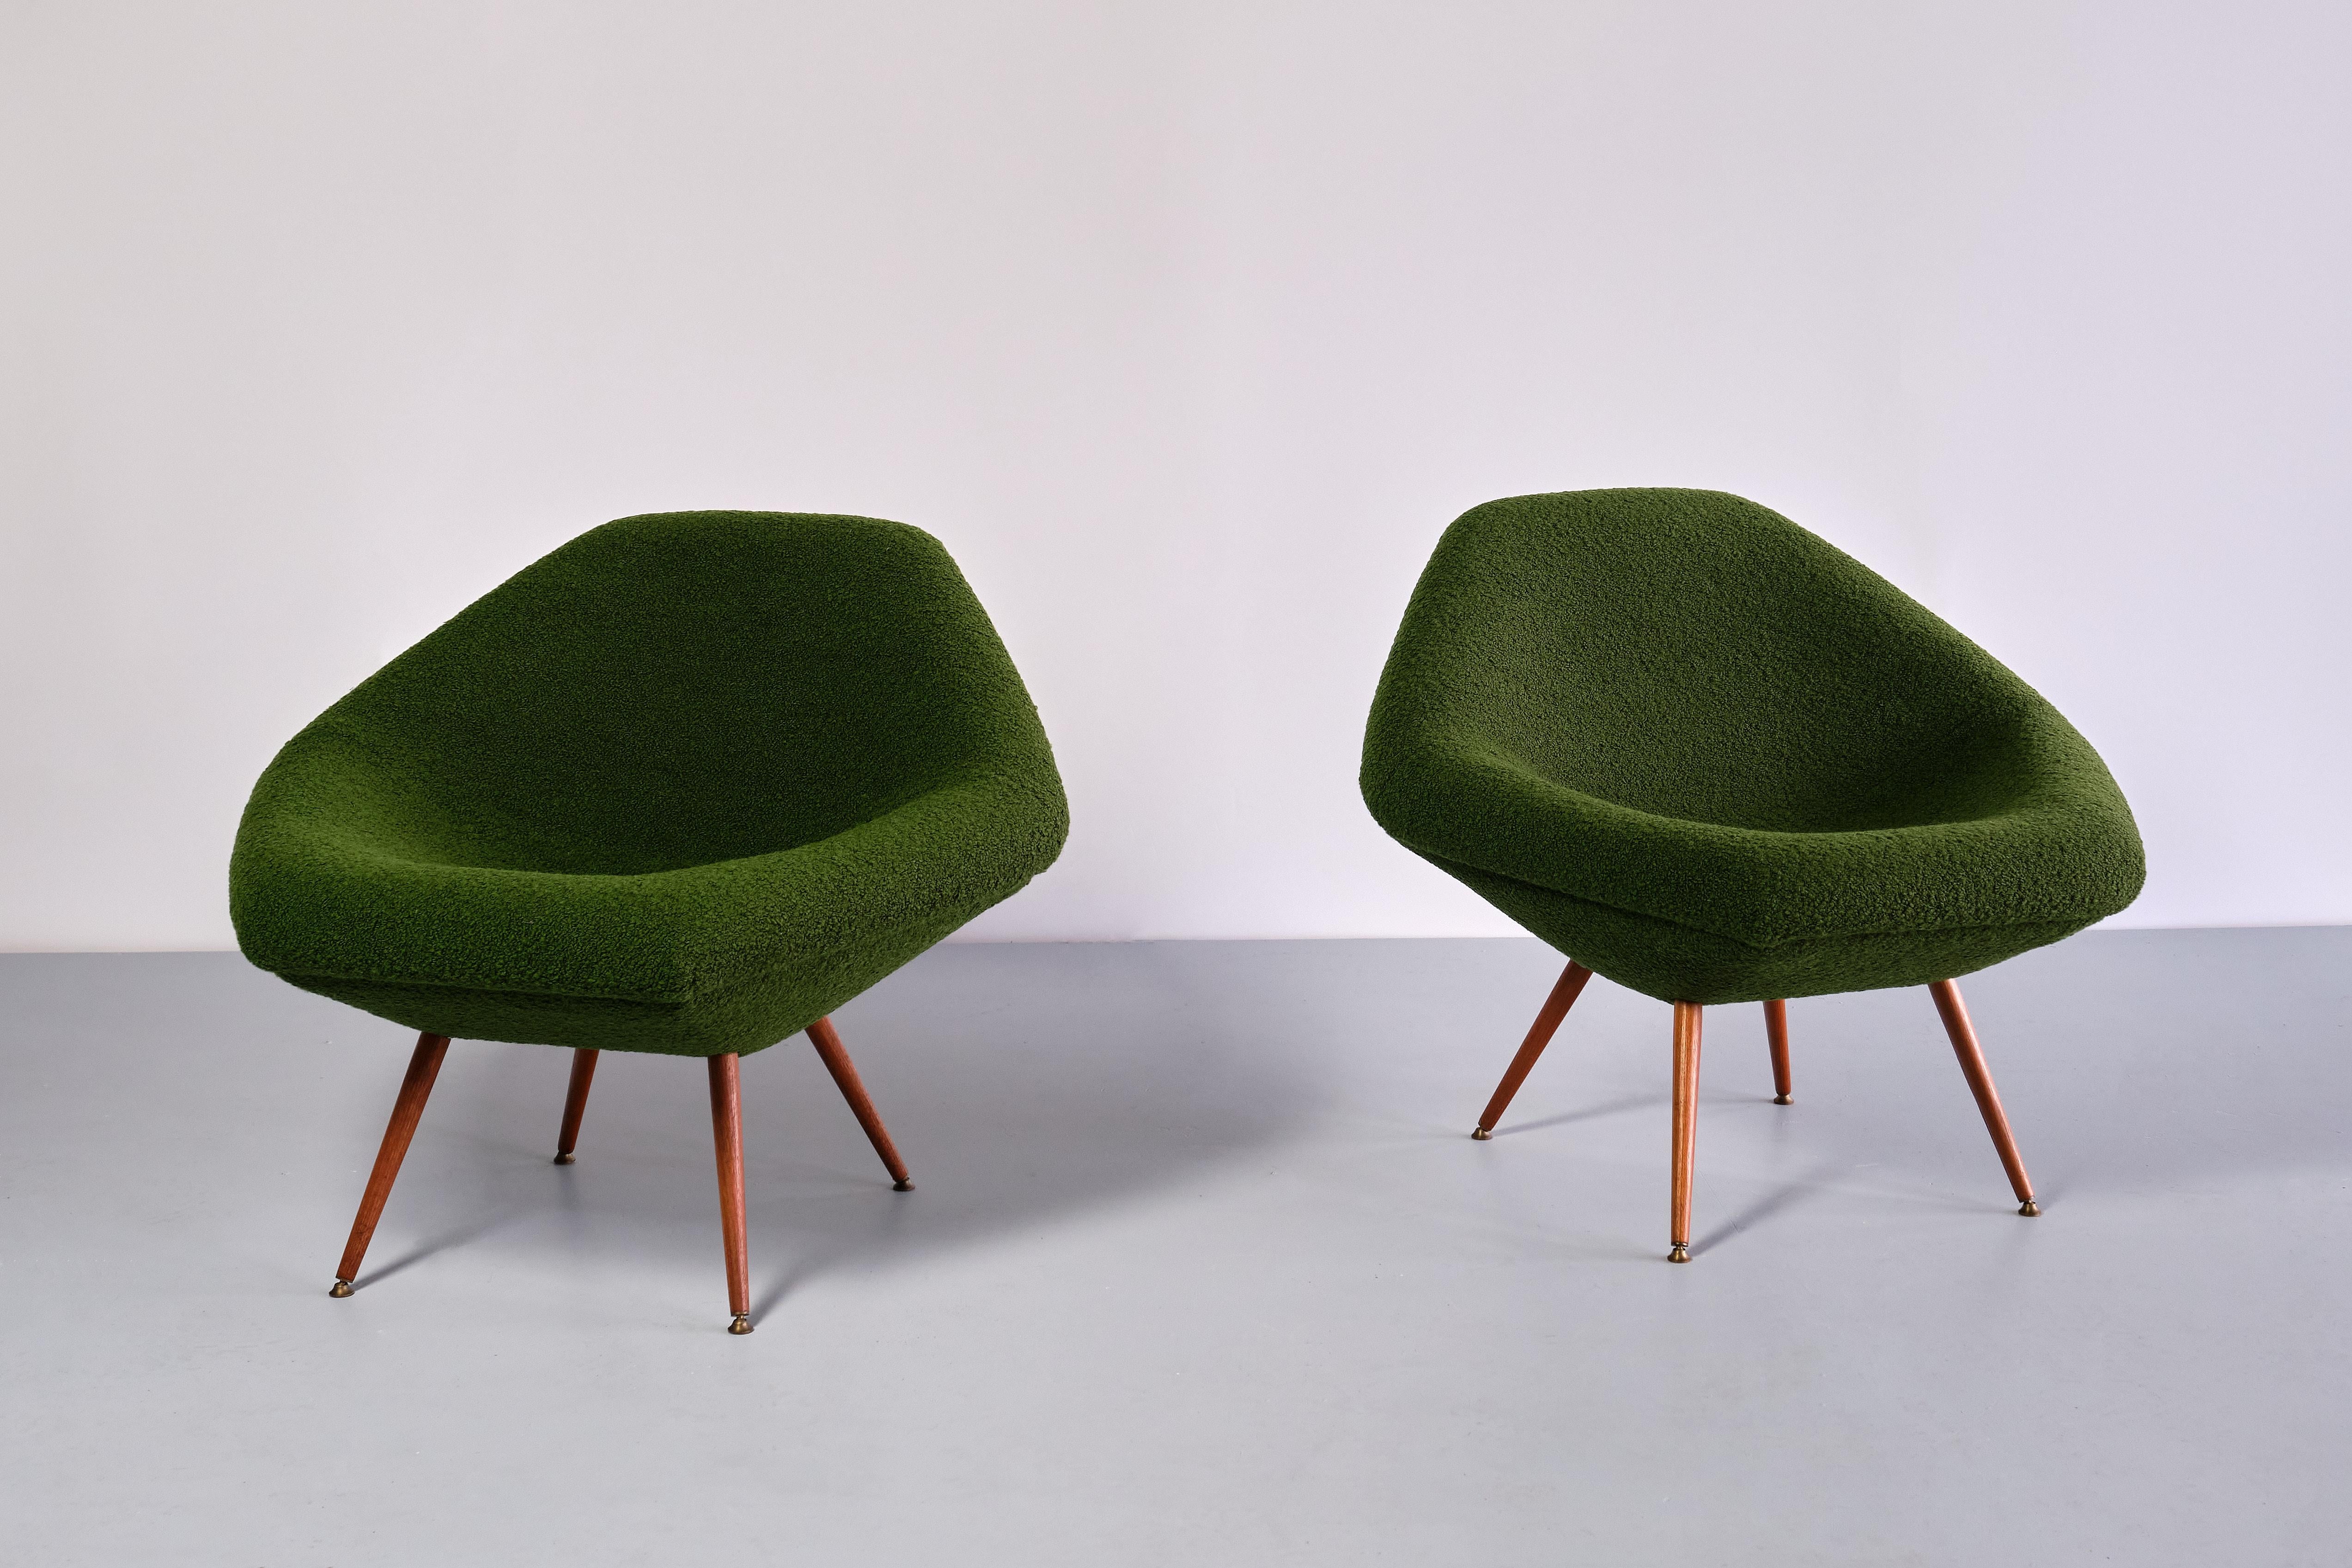 Swedish Pair of Arne Dahlén Lounge Chairs in Green Bouclé and Teak, Sweden, 1960s For Sale